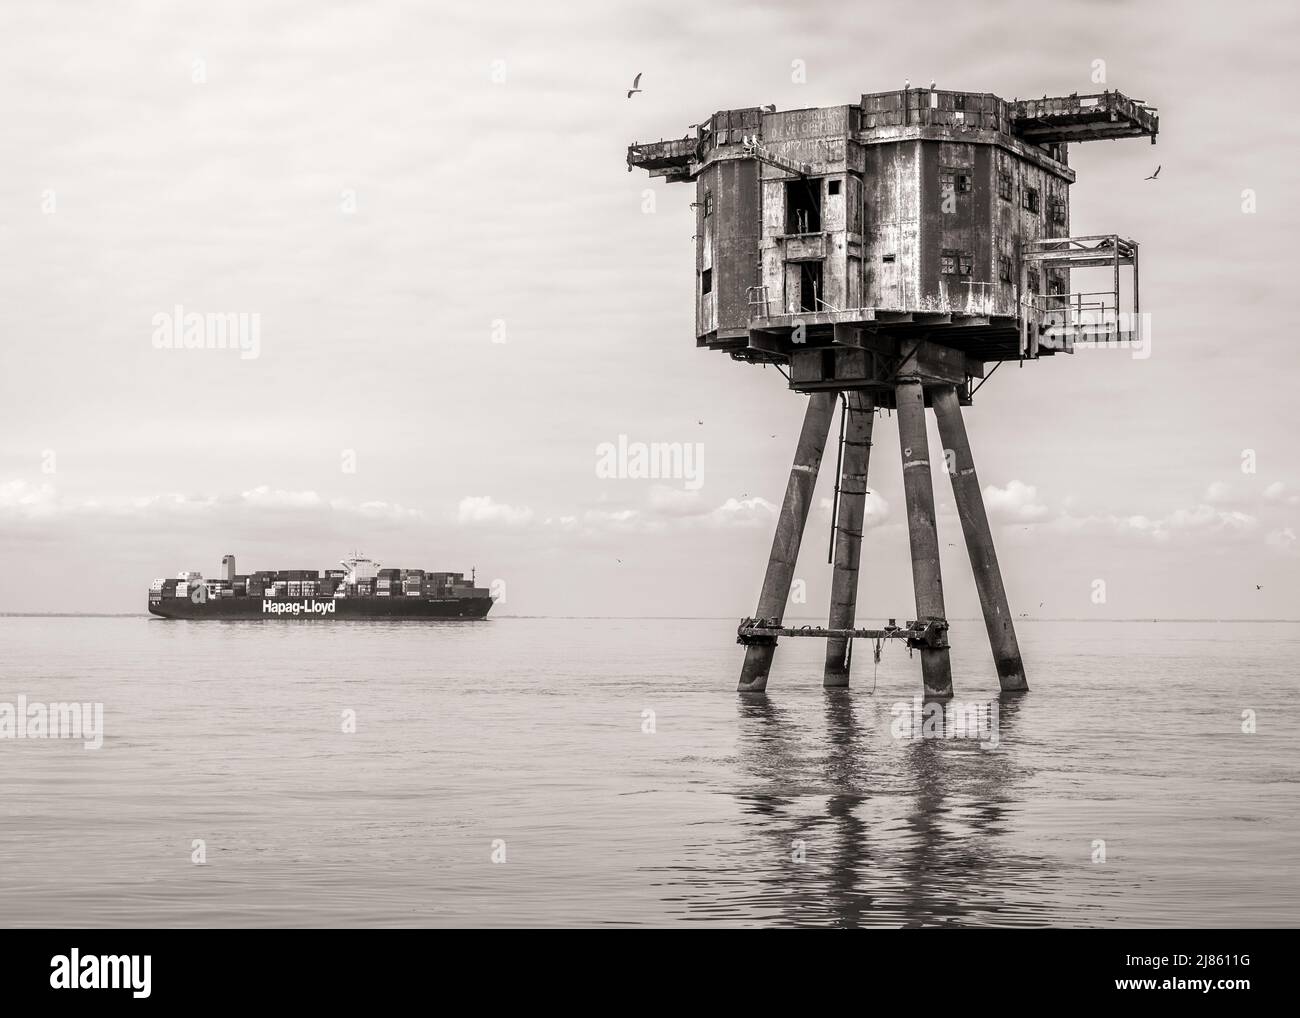 Maunsell Fort and container ship in the Thames Estuary Stock Photo